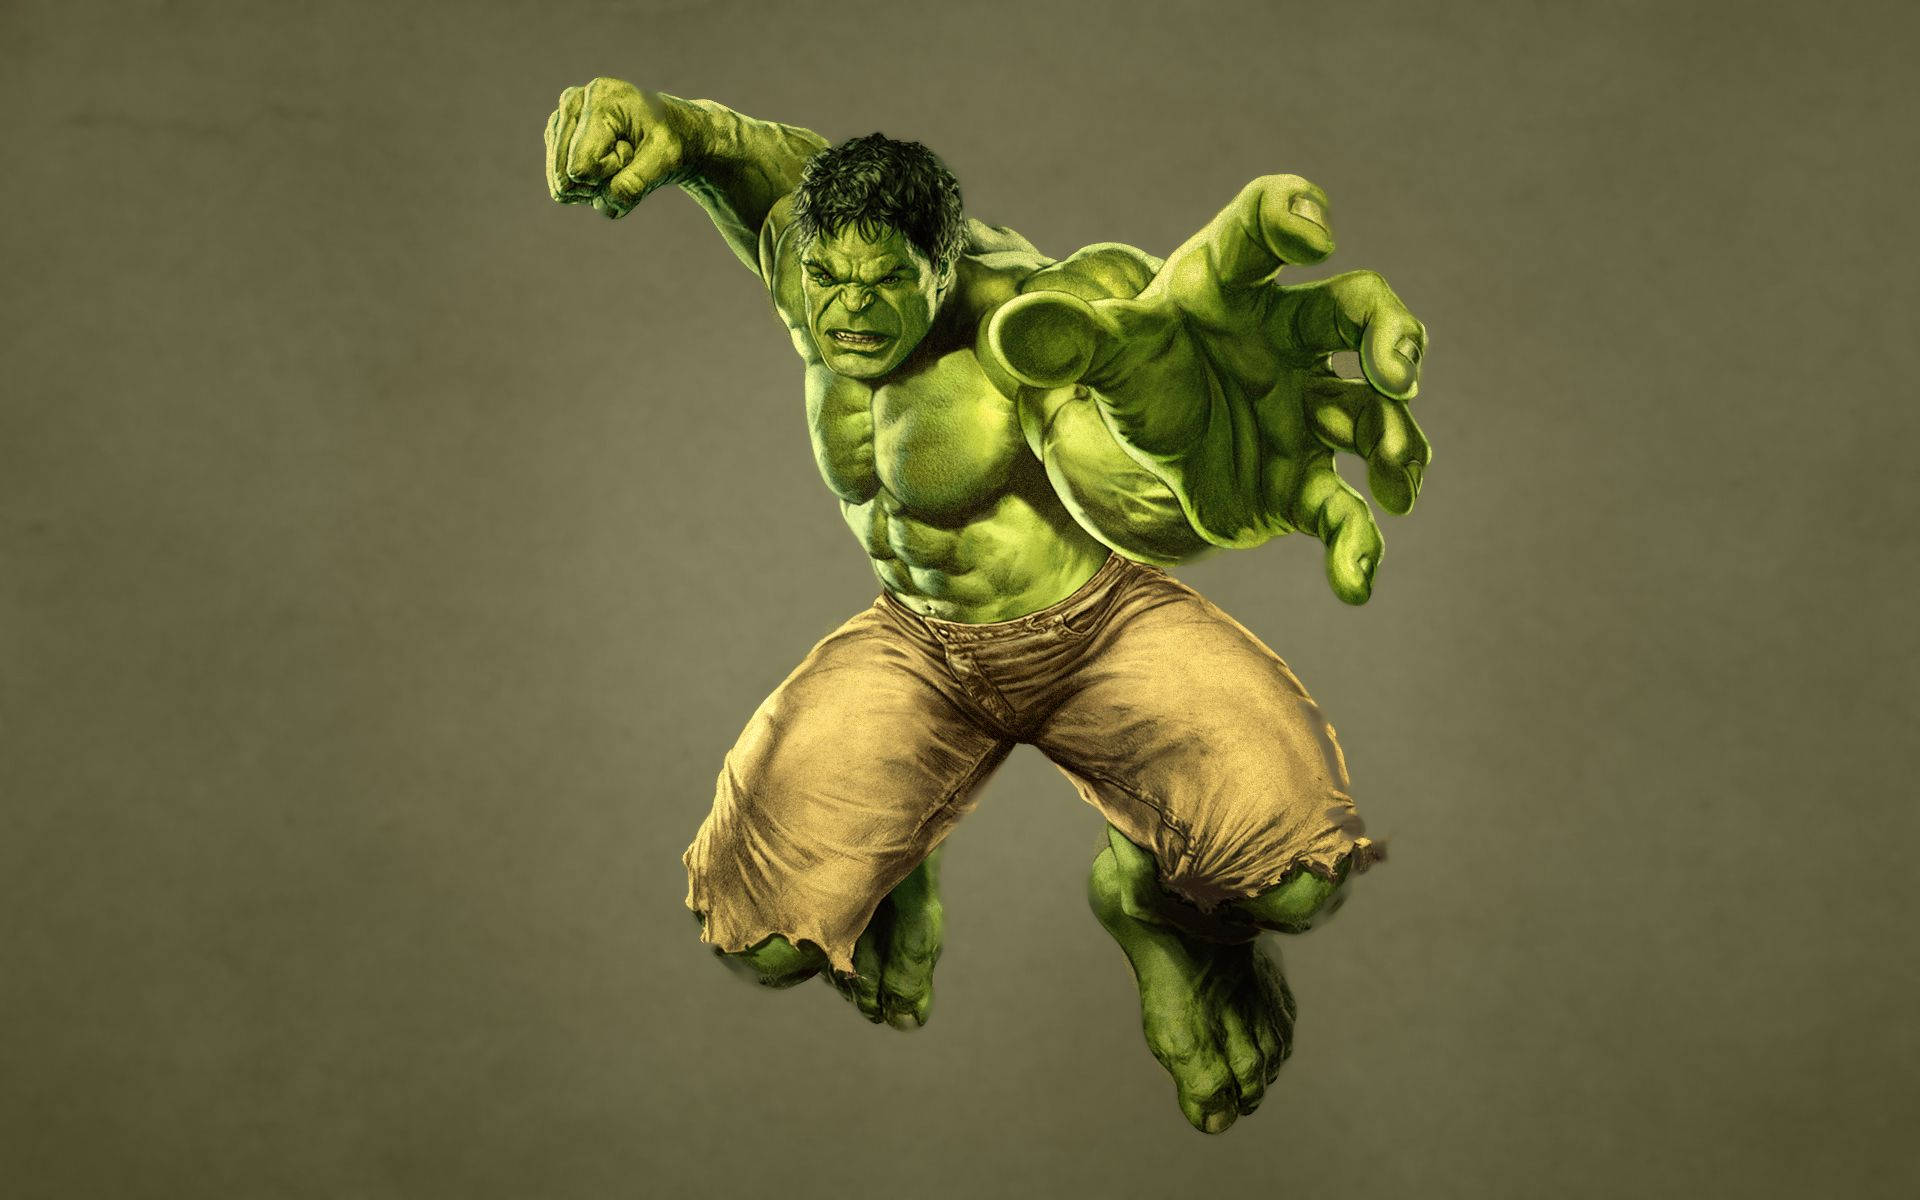 Punching And Leaping Hulk Background